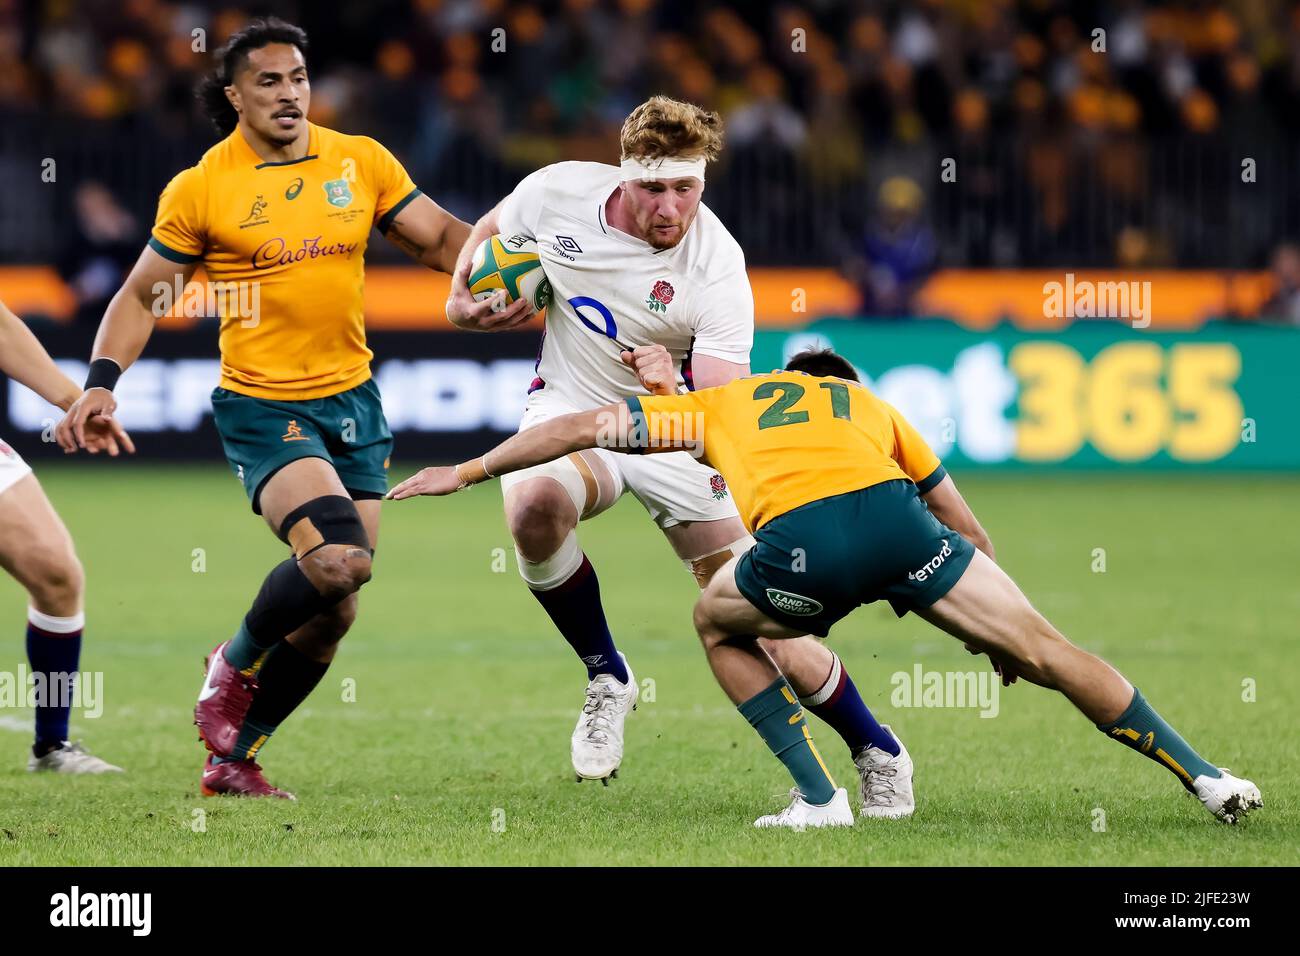 Perth, Australia, 2 July, 2022. Ollie Chessum of England runs with the ball during the rugby international test match between the Australia Wallabies and England at Optus Stadium on July 02, 2022 in Perth, Australia. Credit: Graham Conaty/Speed Media/Alamy Live News Stock Photo